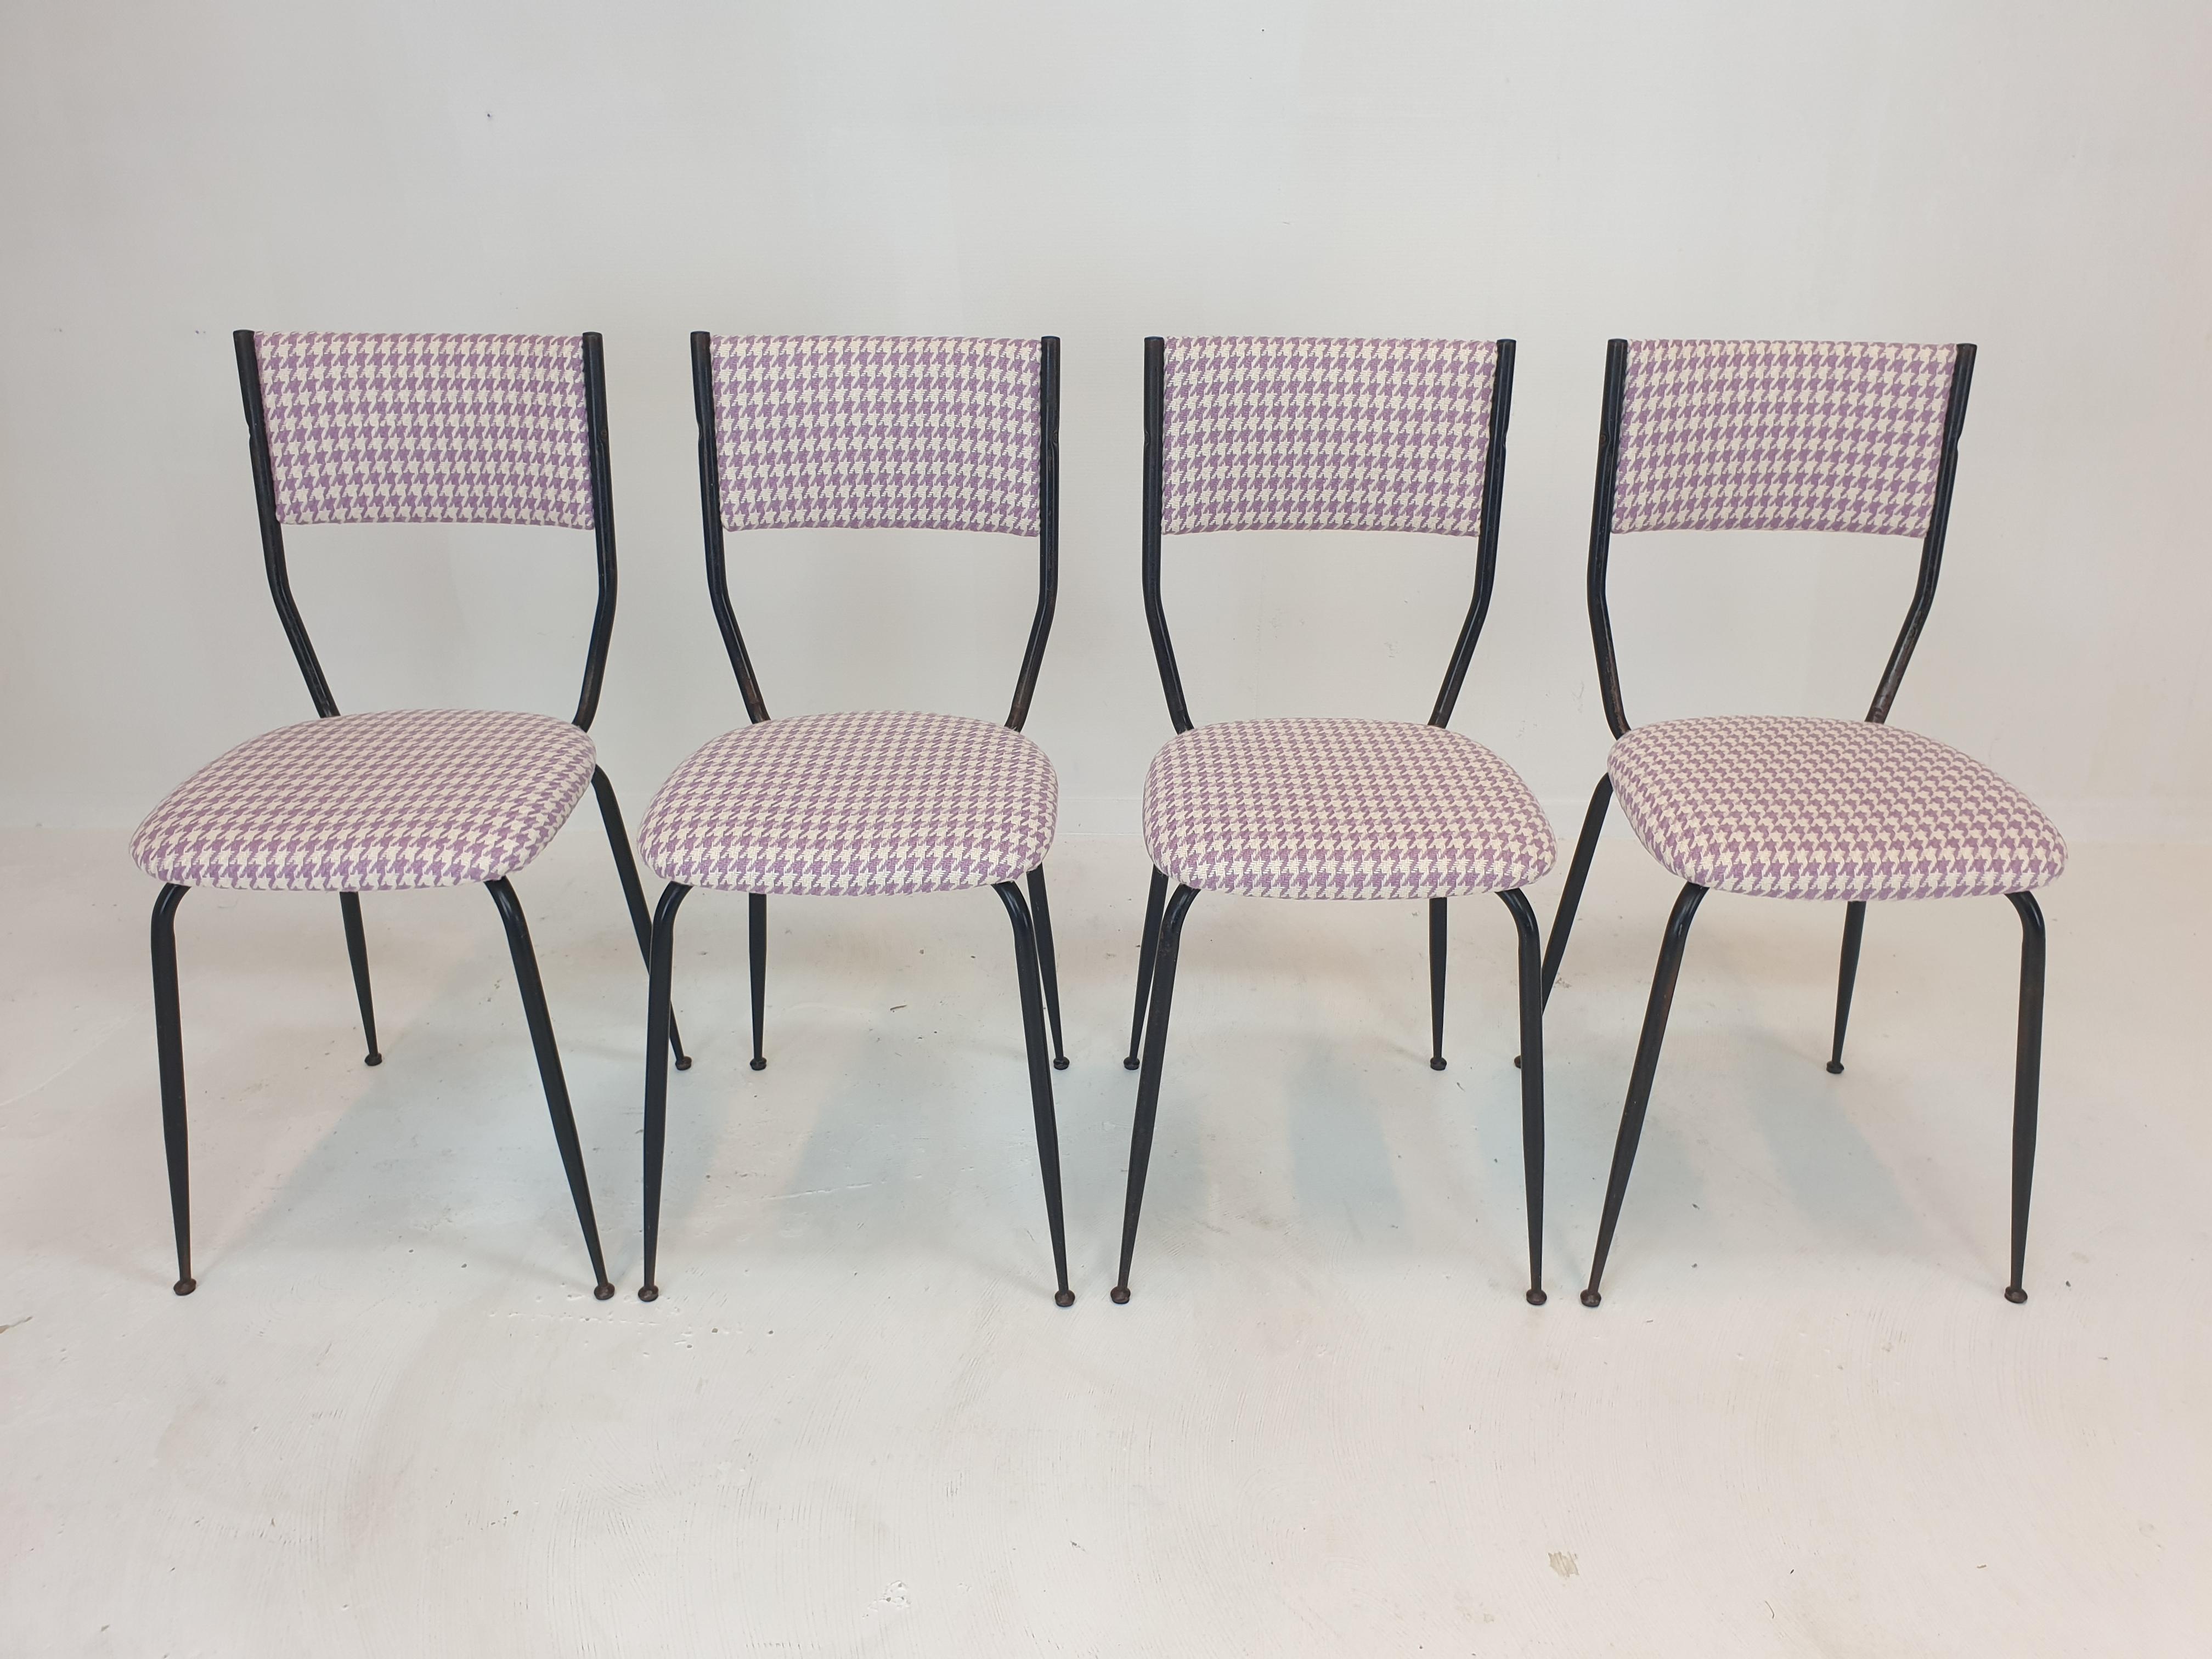 Beautiful set of 4 Italian armchairs, 1960s.
Made of black lacquered steel.

The chairs are restored with new fabric and new foam, they are in perfect condition.
They are reupholstered with very exclusive and stunning C & C Milano fabric.
The